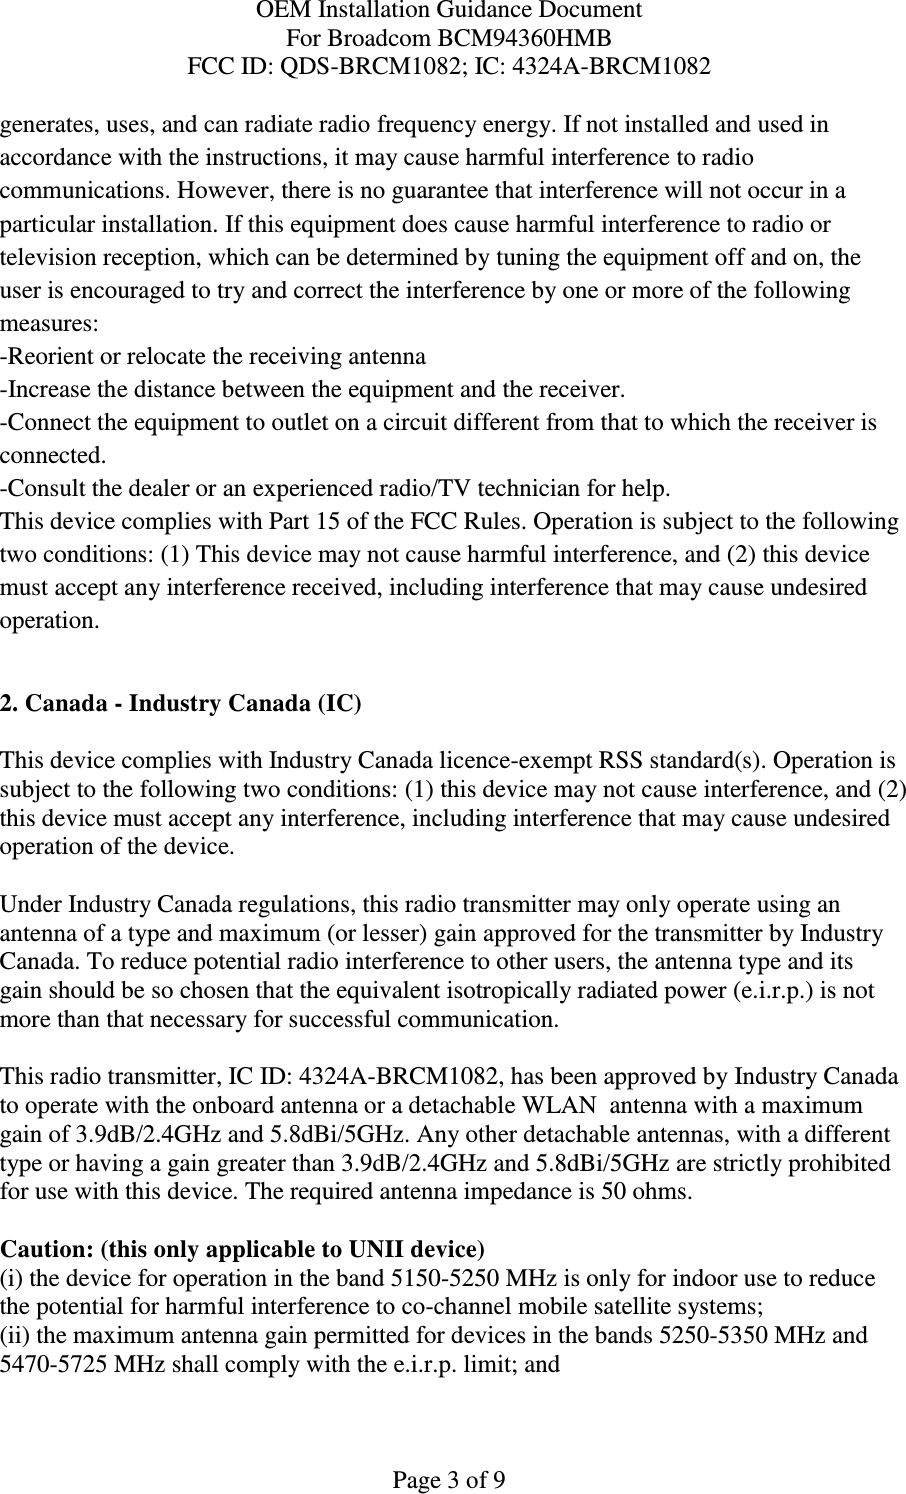 OEM Installation Guidance Document For Broadcom BCM94360HMB FCC ID: QDS-BRCM1082; IC: 4324A-BRCM1082  Page 3 of 9 generates, uses, and can radiate radio frequency energy. If not installed and used in accordance with the instructions, it may cause harmful interference to radio communications. However, there is no guarantee that interference will not occur in a particular installation. If this equipment does cause harmful interference to radio or television reception, which can be determined by tuning the equipment off and on, the user is encouraged to try and correct the interference by one or more of the following measures: -Reorient or relocate the receiving antenna -Increase the distance between the equipment and the receiver. -Connect the equipment to outlet on a circuit different from that to which the receiver is connected. -Consult the dealer or an experienced radio/TV technician for help. This device complies with Part 15 of the FCC Rules. Operation is subject to the following two conditions: (1) This device may not cause harmful interference, and (2) this device must accept any interference received, including interference that may cause undesired operation.  2. Canada - Industry Canada (IC)  This device complies with Industry Canada licence-exempt RSS standard(s). Operation is subject to the following two conditions: (1) this device may not cause interference, and (2) this device must accept any interference, including interference that may cause undesired operation of the device.  Under Industry Canada regulations, this radio transmitter may only operate using an antenna of a type and maximum (or lesser) gain approved for the transmitter by Industry Canada. To reduce potential radio interference to other users, the antenna type and its gain should be so chosen that the equivalent isotropically radiated power (e.i.r.p.) is not more than that necessary for successful communication.  This radio transmitter, IC ID: 4324A-BRCM1082, has been approved by Industry Canada to operate with the onboard antenna or a detachable WLAN  antenna with a maximum gain of 3.9dB/2.4GHz and 5.8dBi/5GHz. Any other detachable antennas, with a different type or having a gain greater than 3.9dB/2.4GHz and 5.8dBi/5GHz are strictly prohibited for use with this device. The required antenna impedance is 50 ohms.  Caution: (this only applicable to UNII device) (i) the device for operation in the band 5150-5250 MHz is only for indoor use to reduce the potential for harmful interference to co-channel mobile satellite systems; (ii) the maximum antenna gain permitted for devices in the bands 5250-5350 MHz and 5470-5725 MHz shall comply with the e.i.r.p. limit; and 